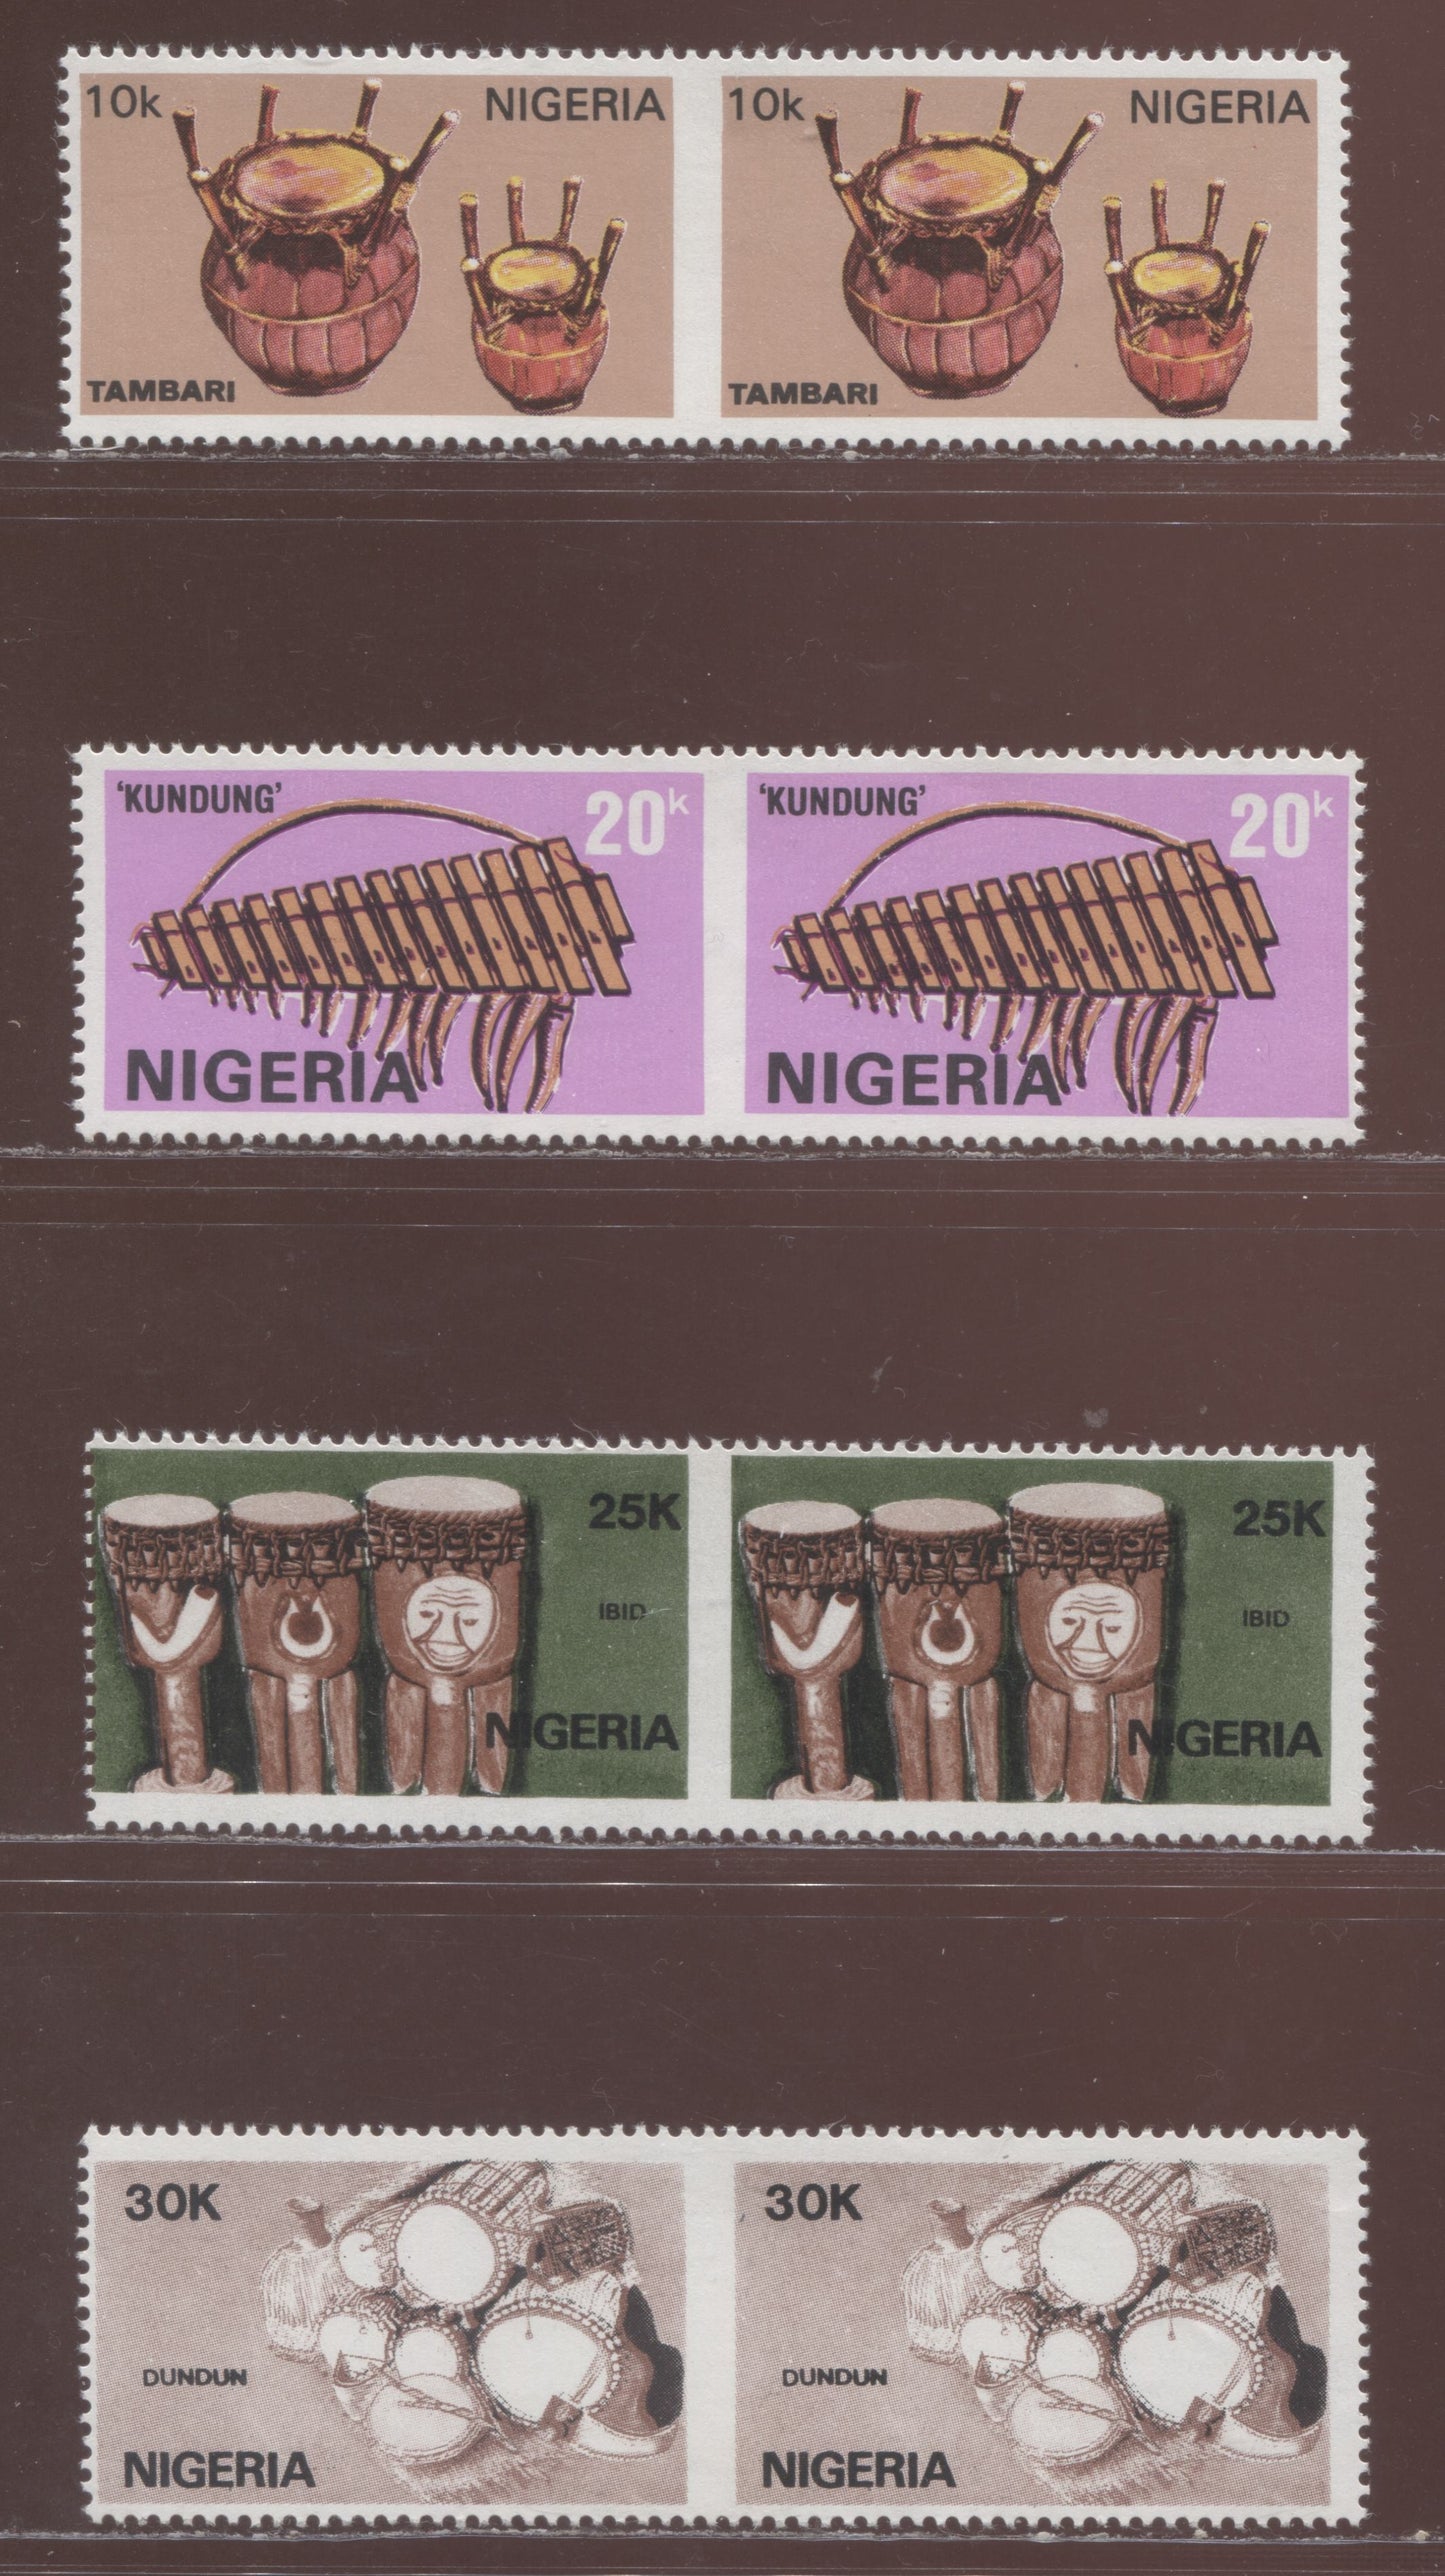 Nigeria SC#545-548 1989 Musical Instruments, 4 VFNH Imperf Between Pairs, Click on Listing to See ALL Pictures, Estimated Value $20 USD